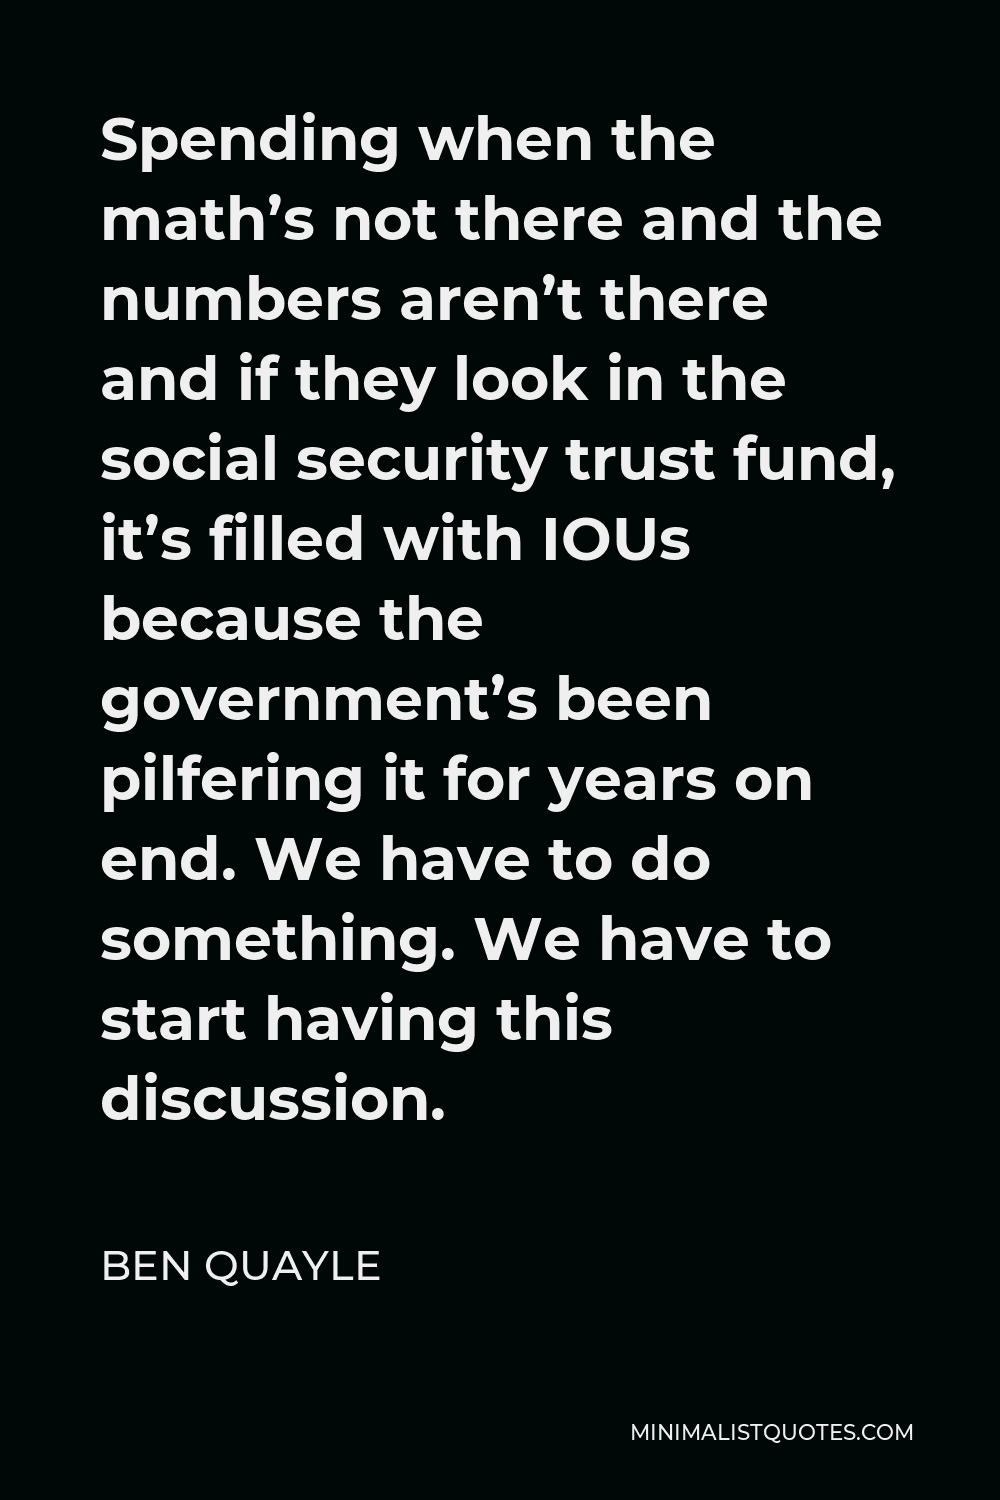 Ben Quayle Quote - Spending when the math’s not there and the numbers aren’t there and if they look in the social security trust fund, it’s filled with IOUs because the government’s been pilfering it for years on end. We have to do something. We have to start having this discussion.